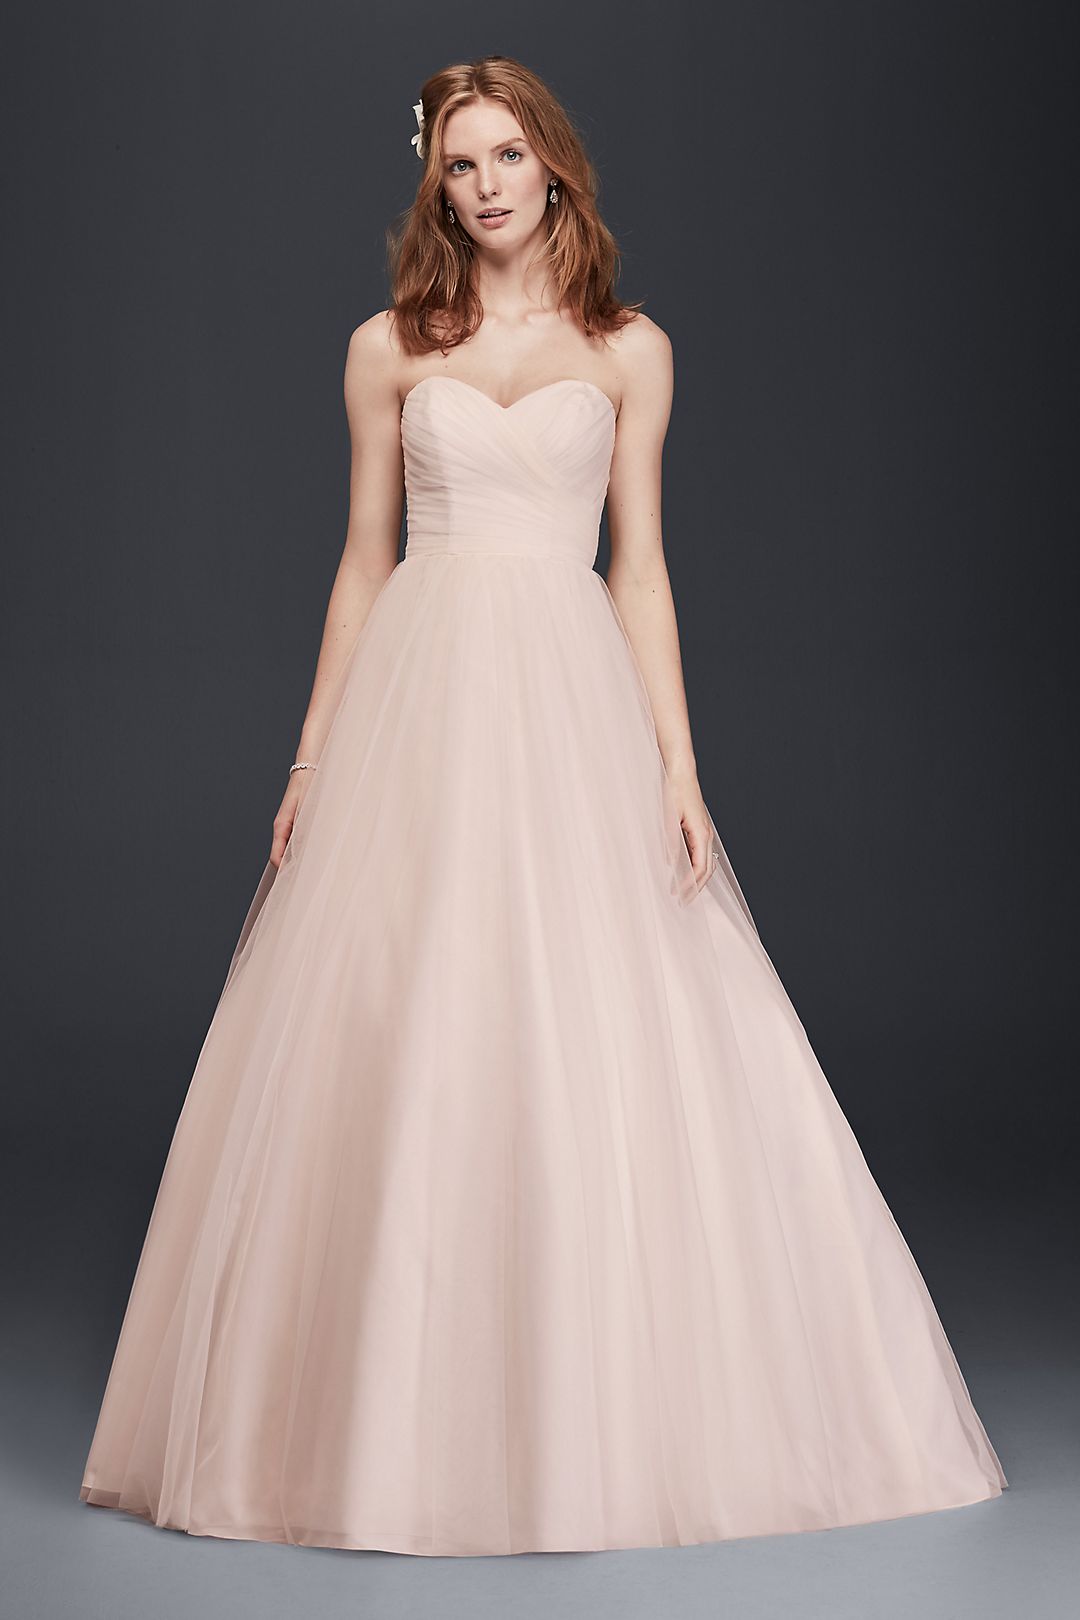 As Is Sweetheart Strapless Tulle Wedding Dress Image 1